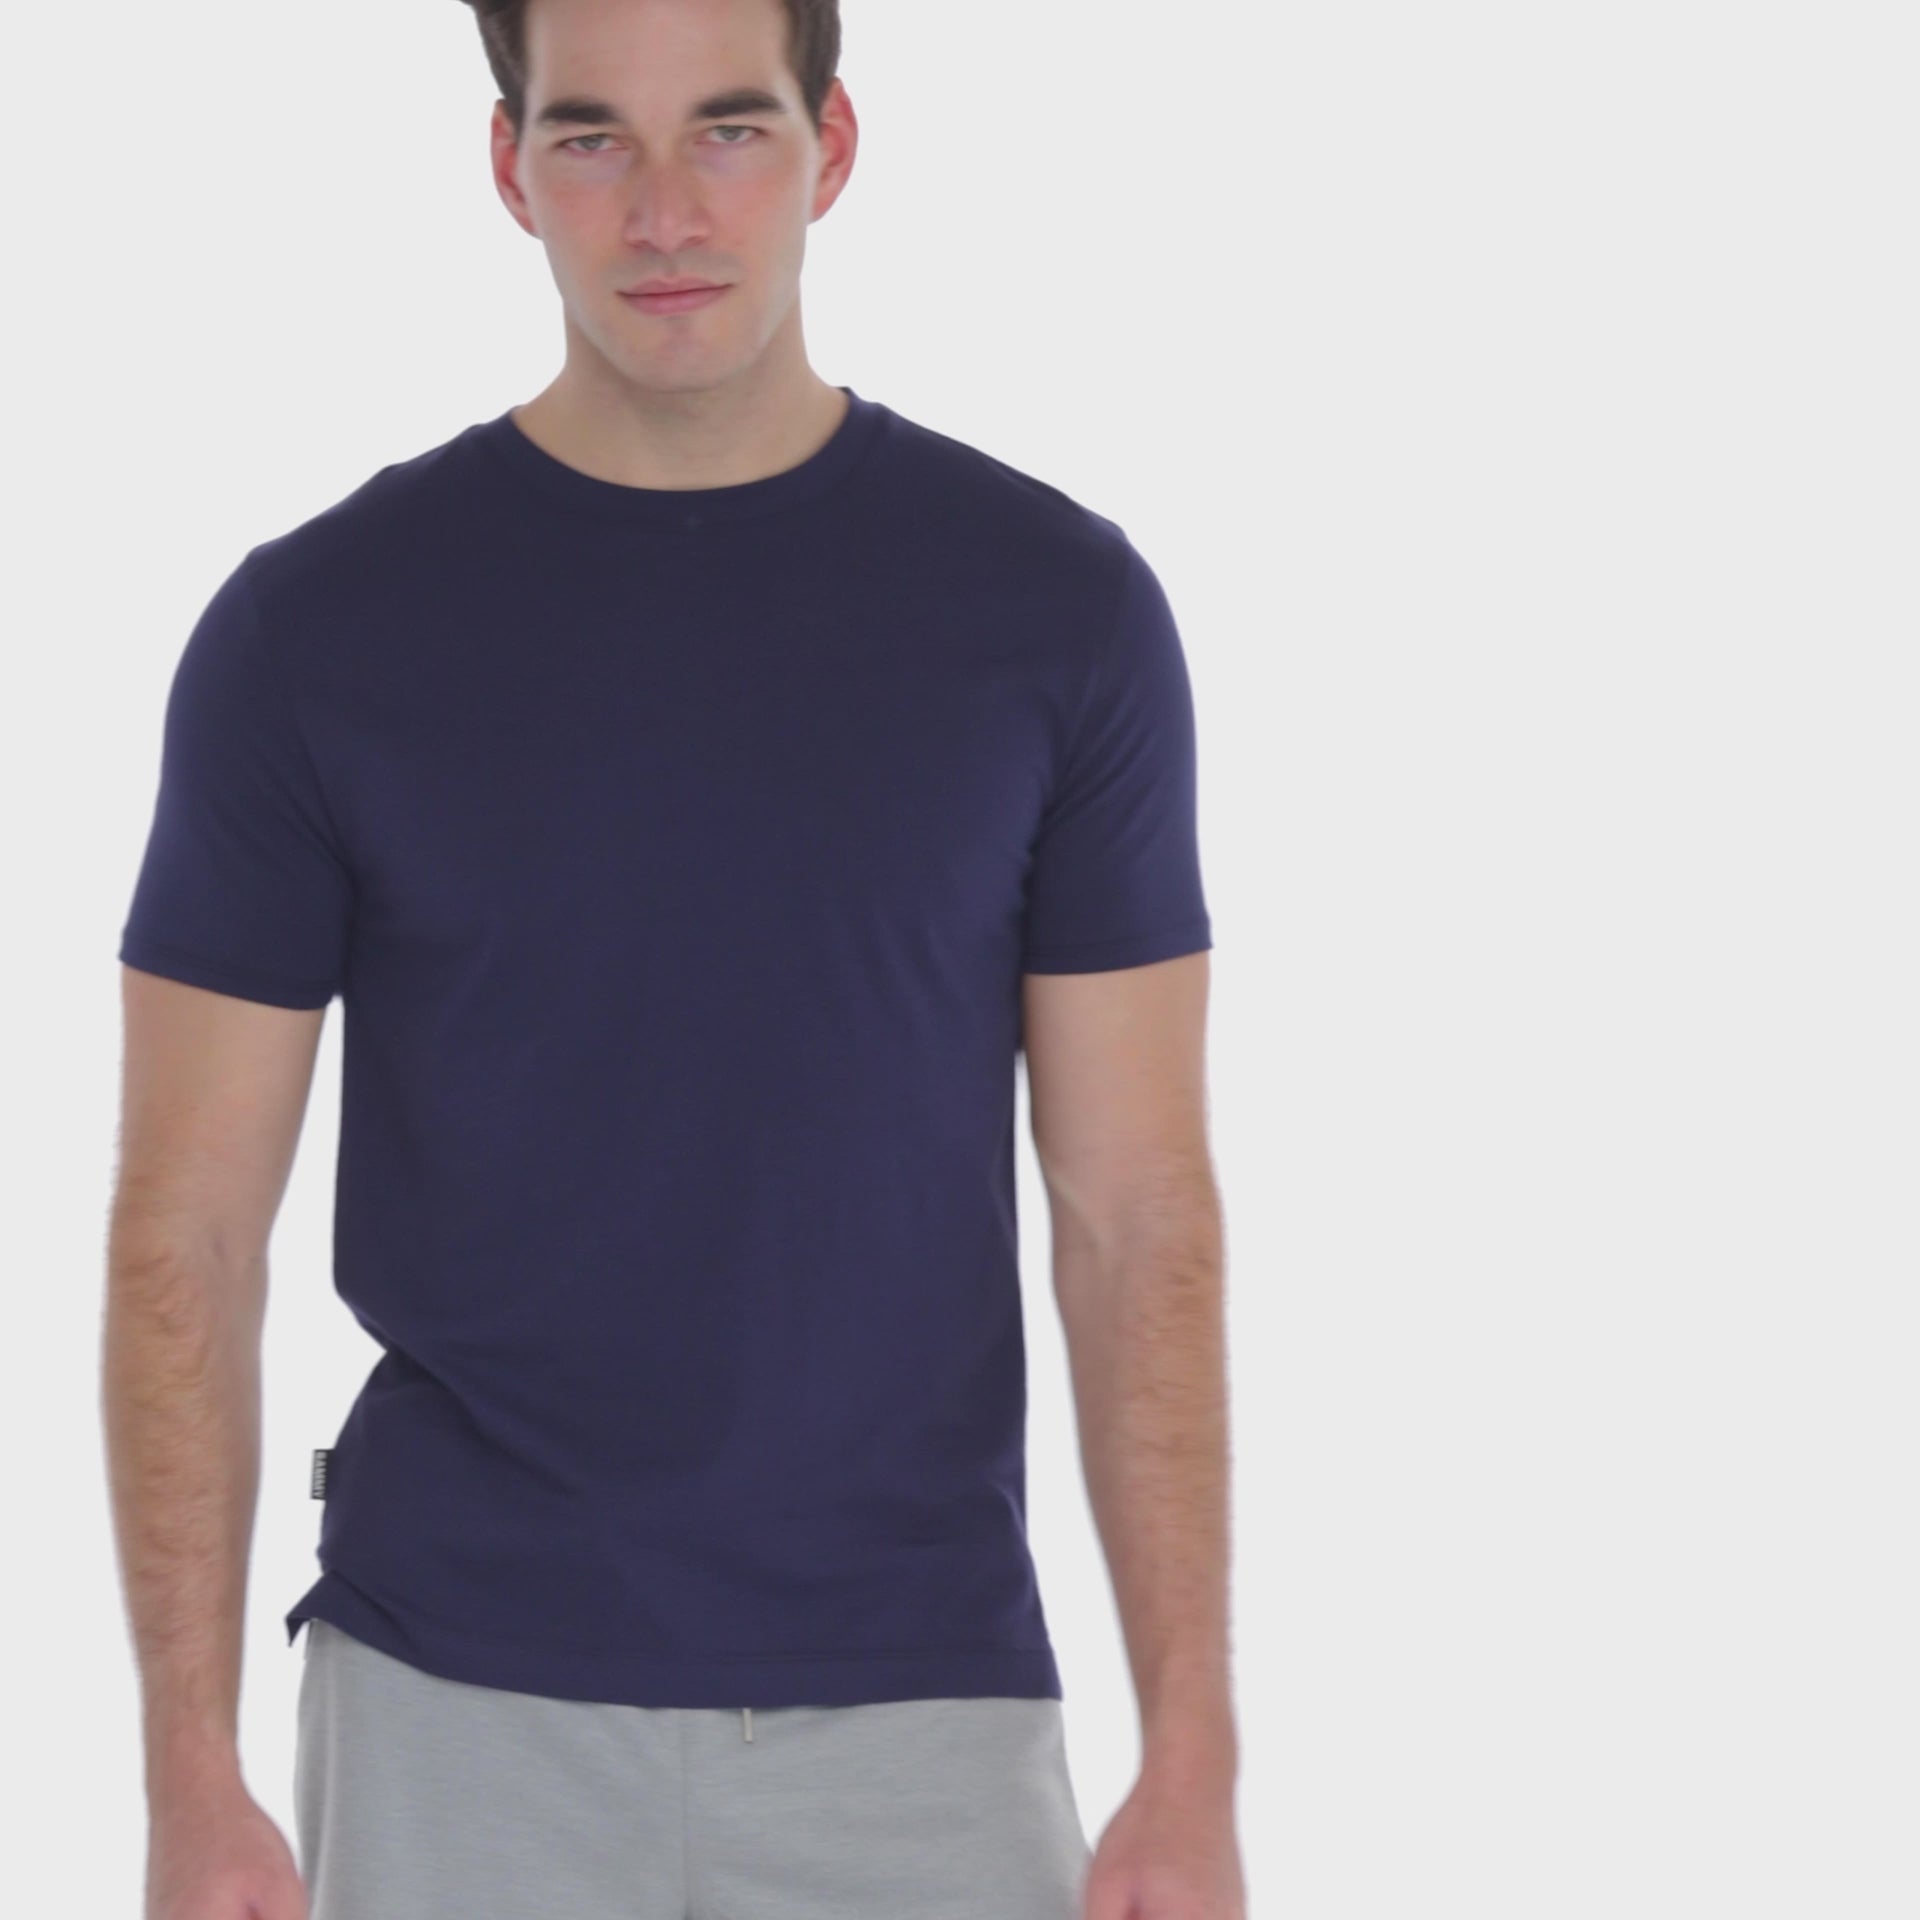 A WHITE WALL VIDEO OF A MALE MODEL WEARING THE SAMMY SHOP UNISEX NAVY EVERYDAY T-SHIRT